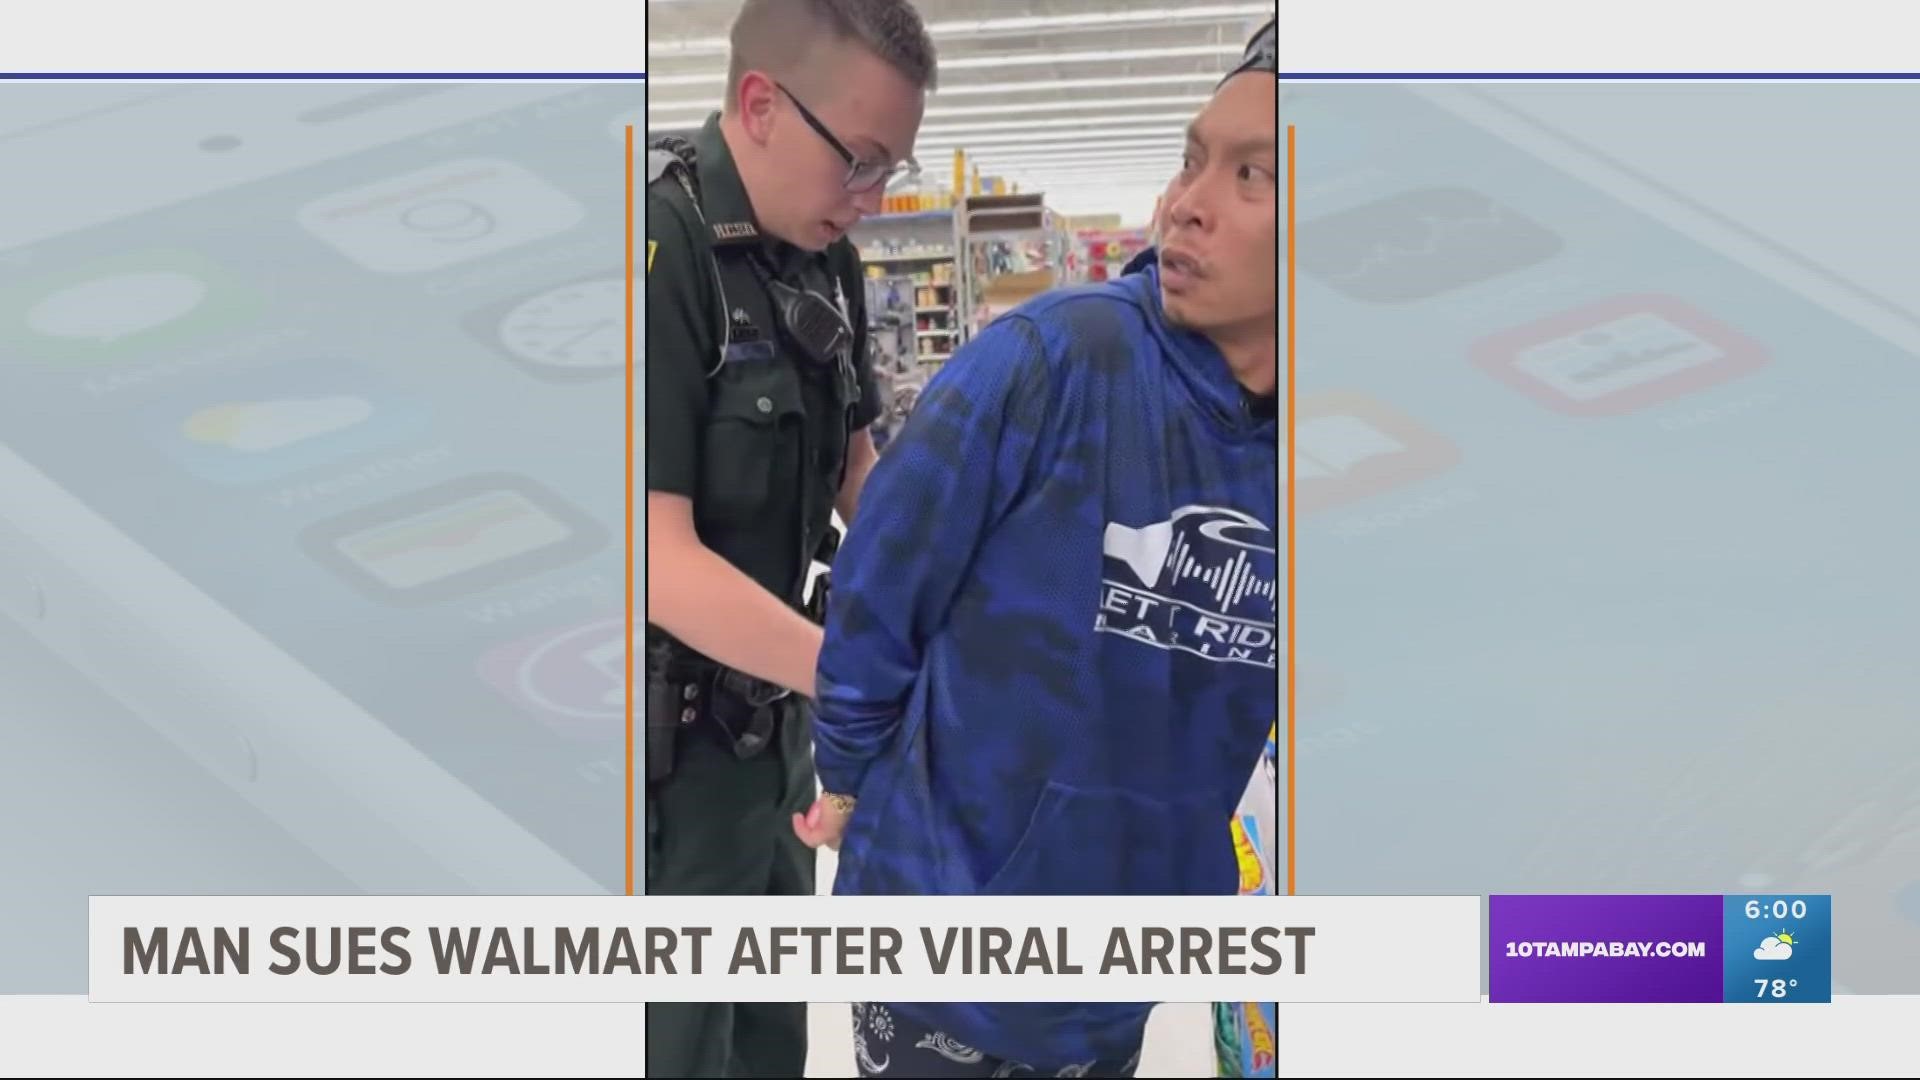 Tony Nguyen said he was arrested at a Spring Hill Walmart, but authorities were looking for someone else also of Asian descent.